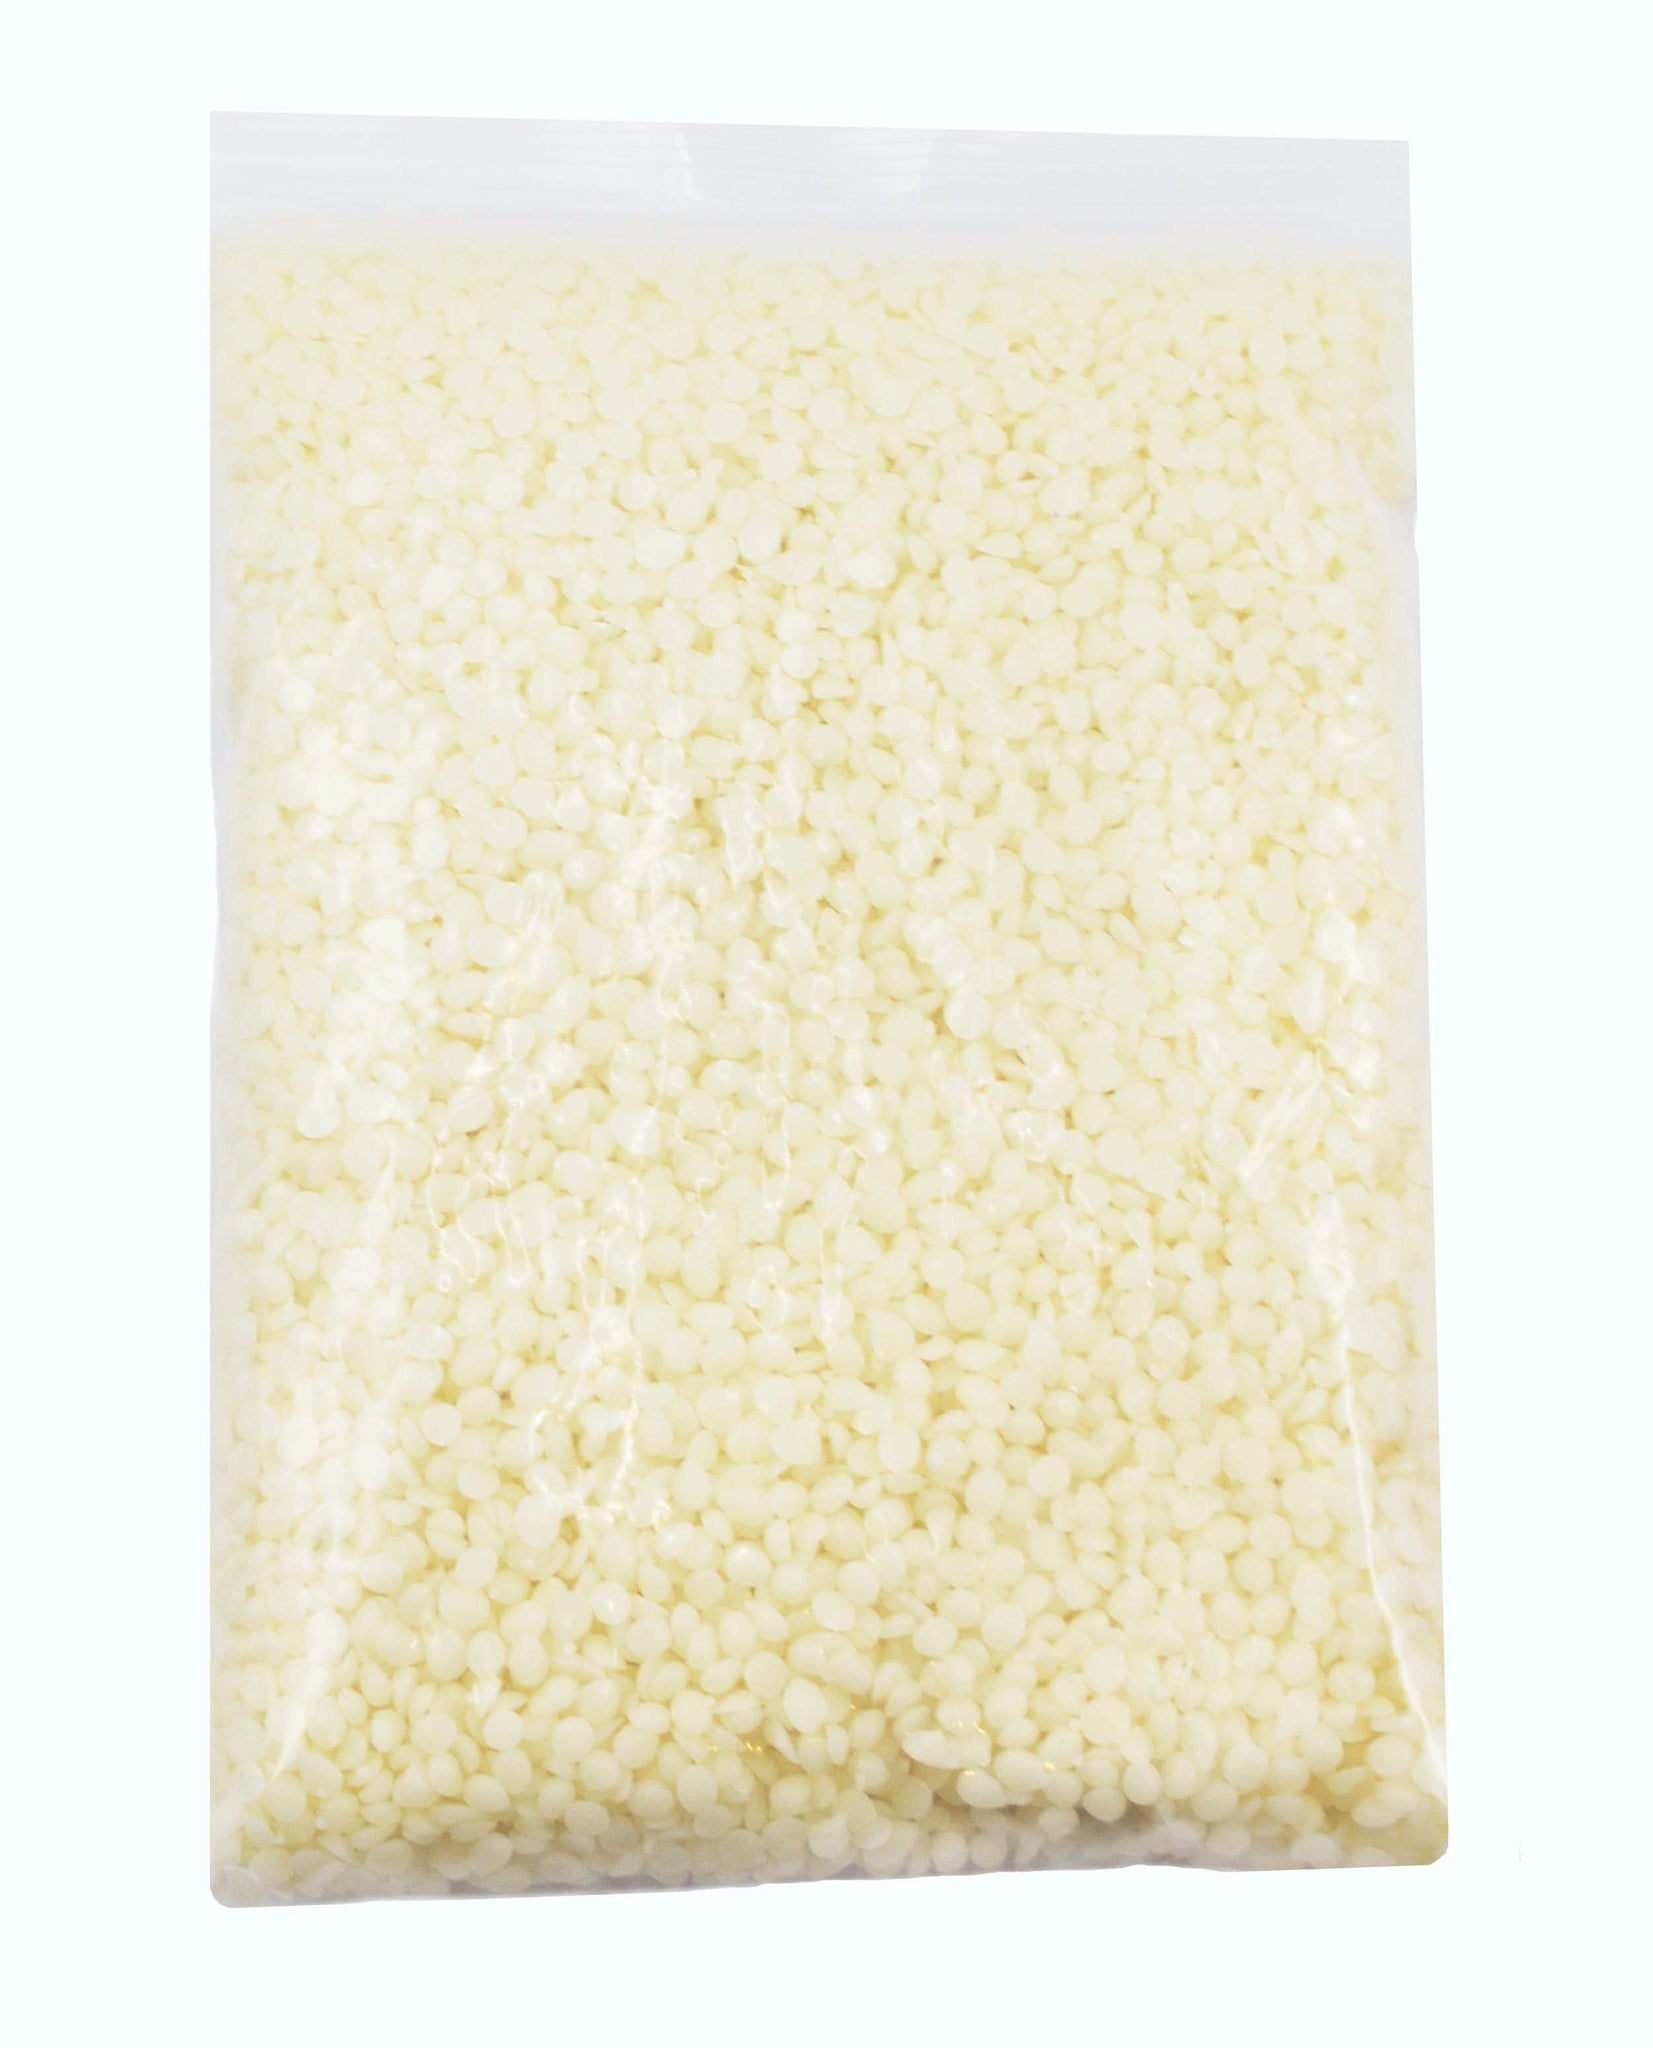 White Beeswax Pellets sourced from a USDA and ISO 9001 Certified Organic  Supplier